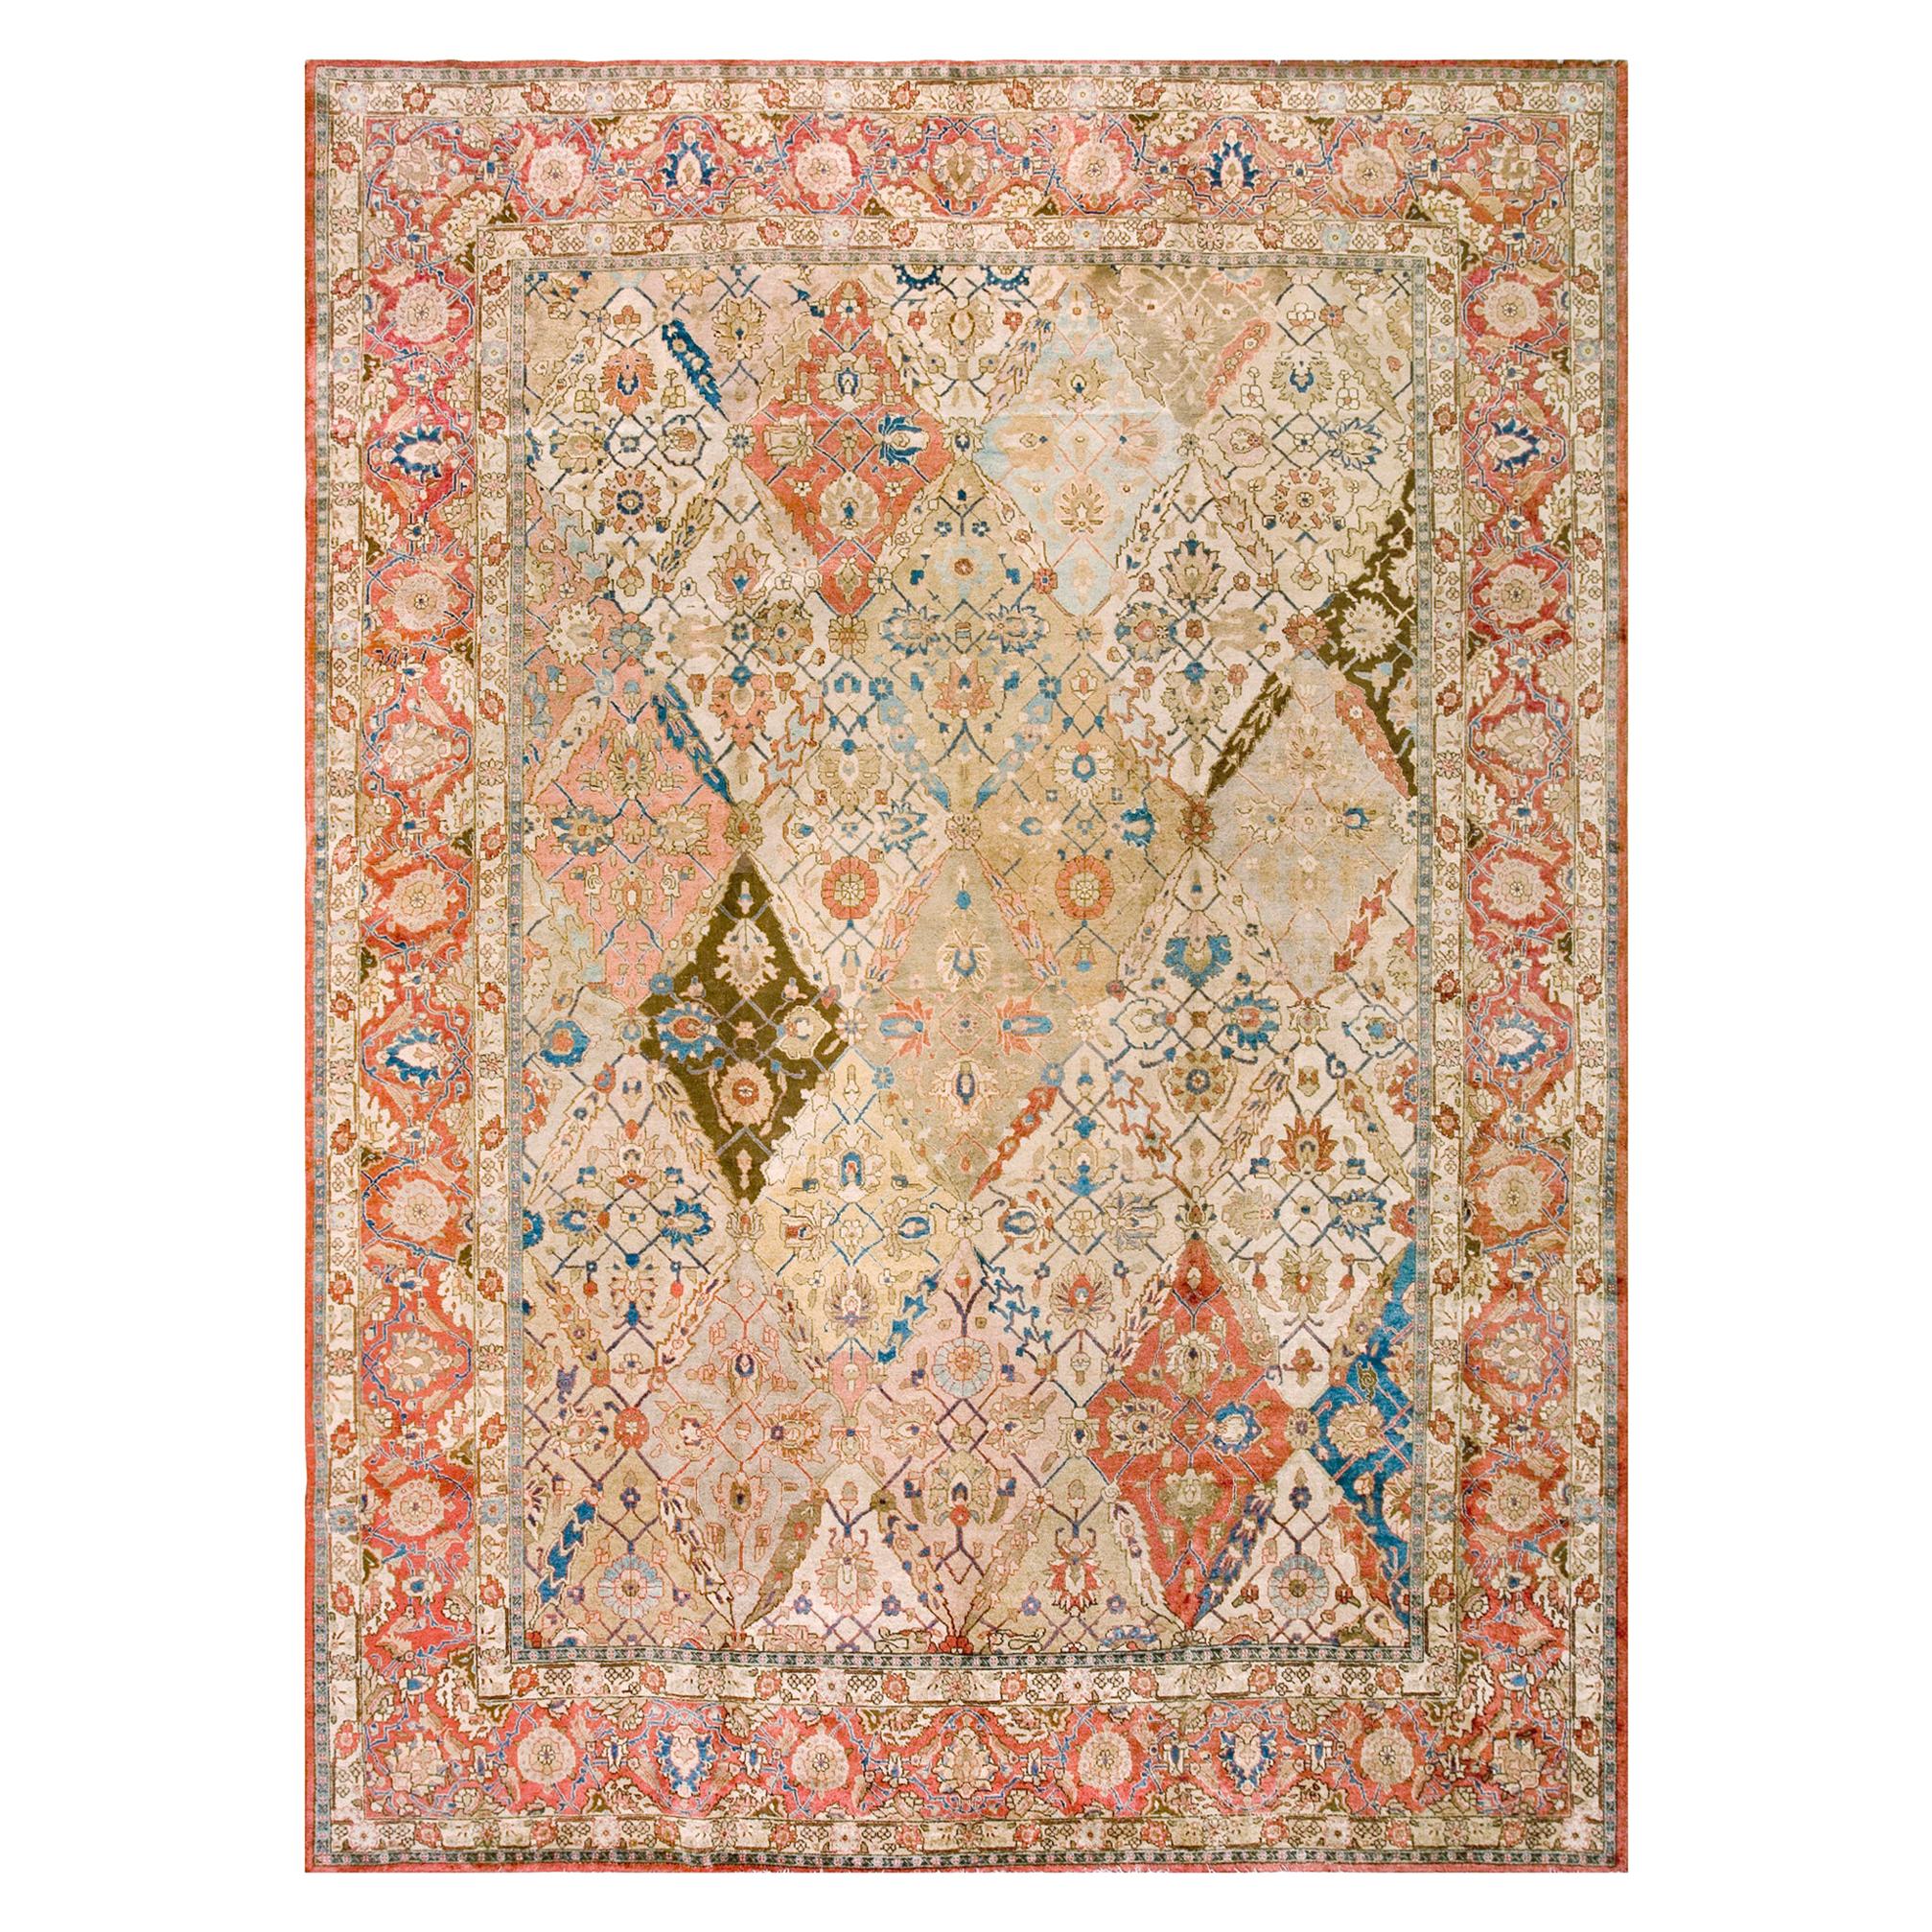 Early 20th Century Persian Tabriz Carpet ( 9'10" x 13'6" - 300 x 412 ) For Sale